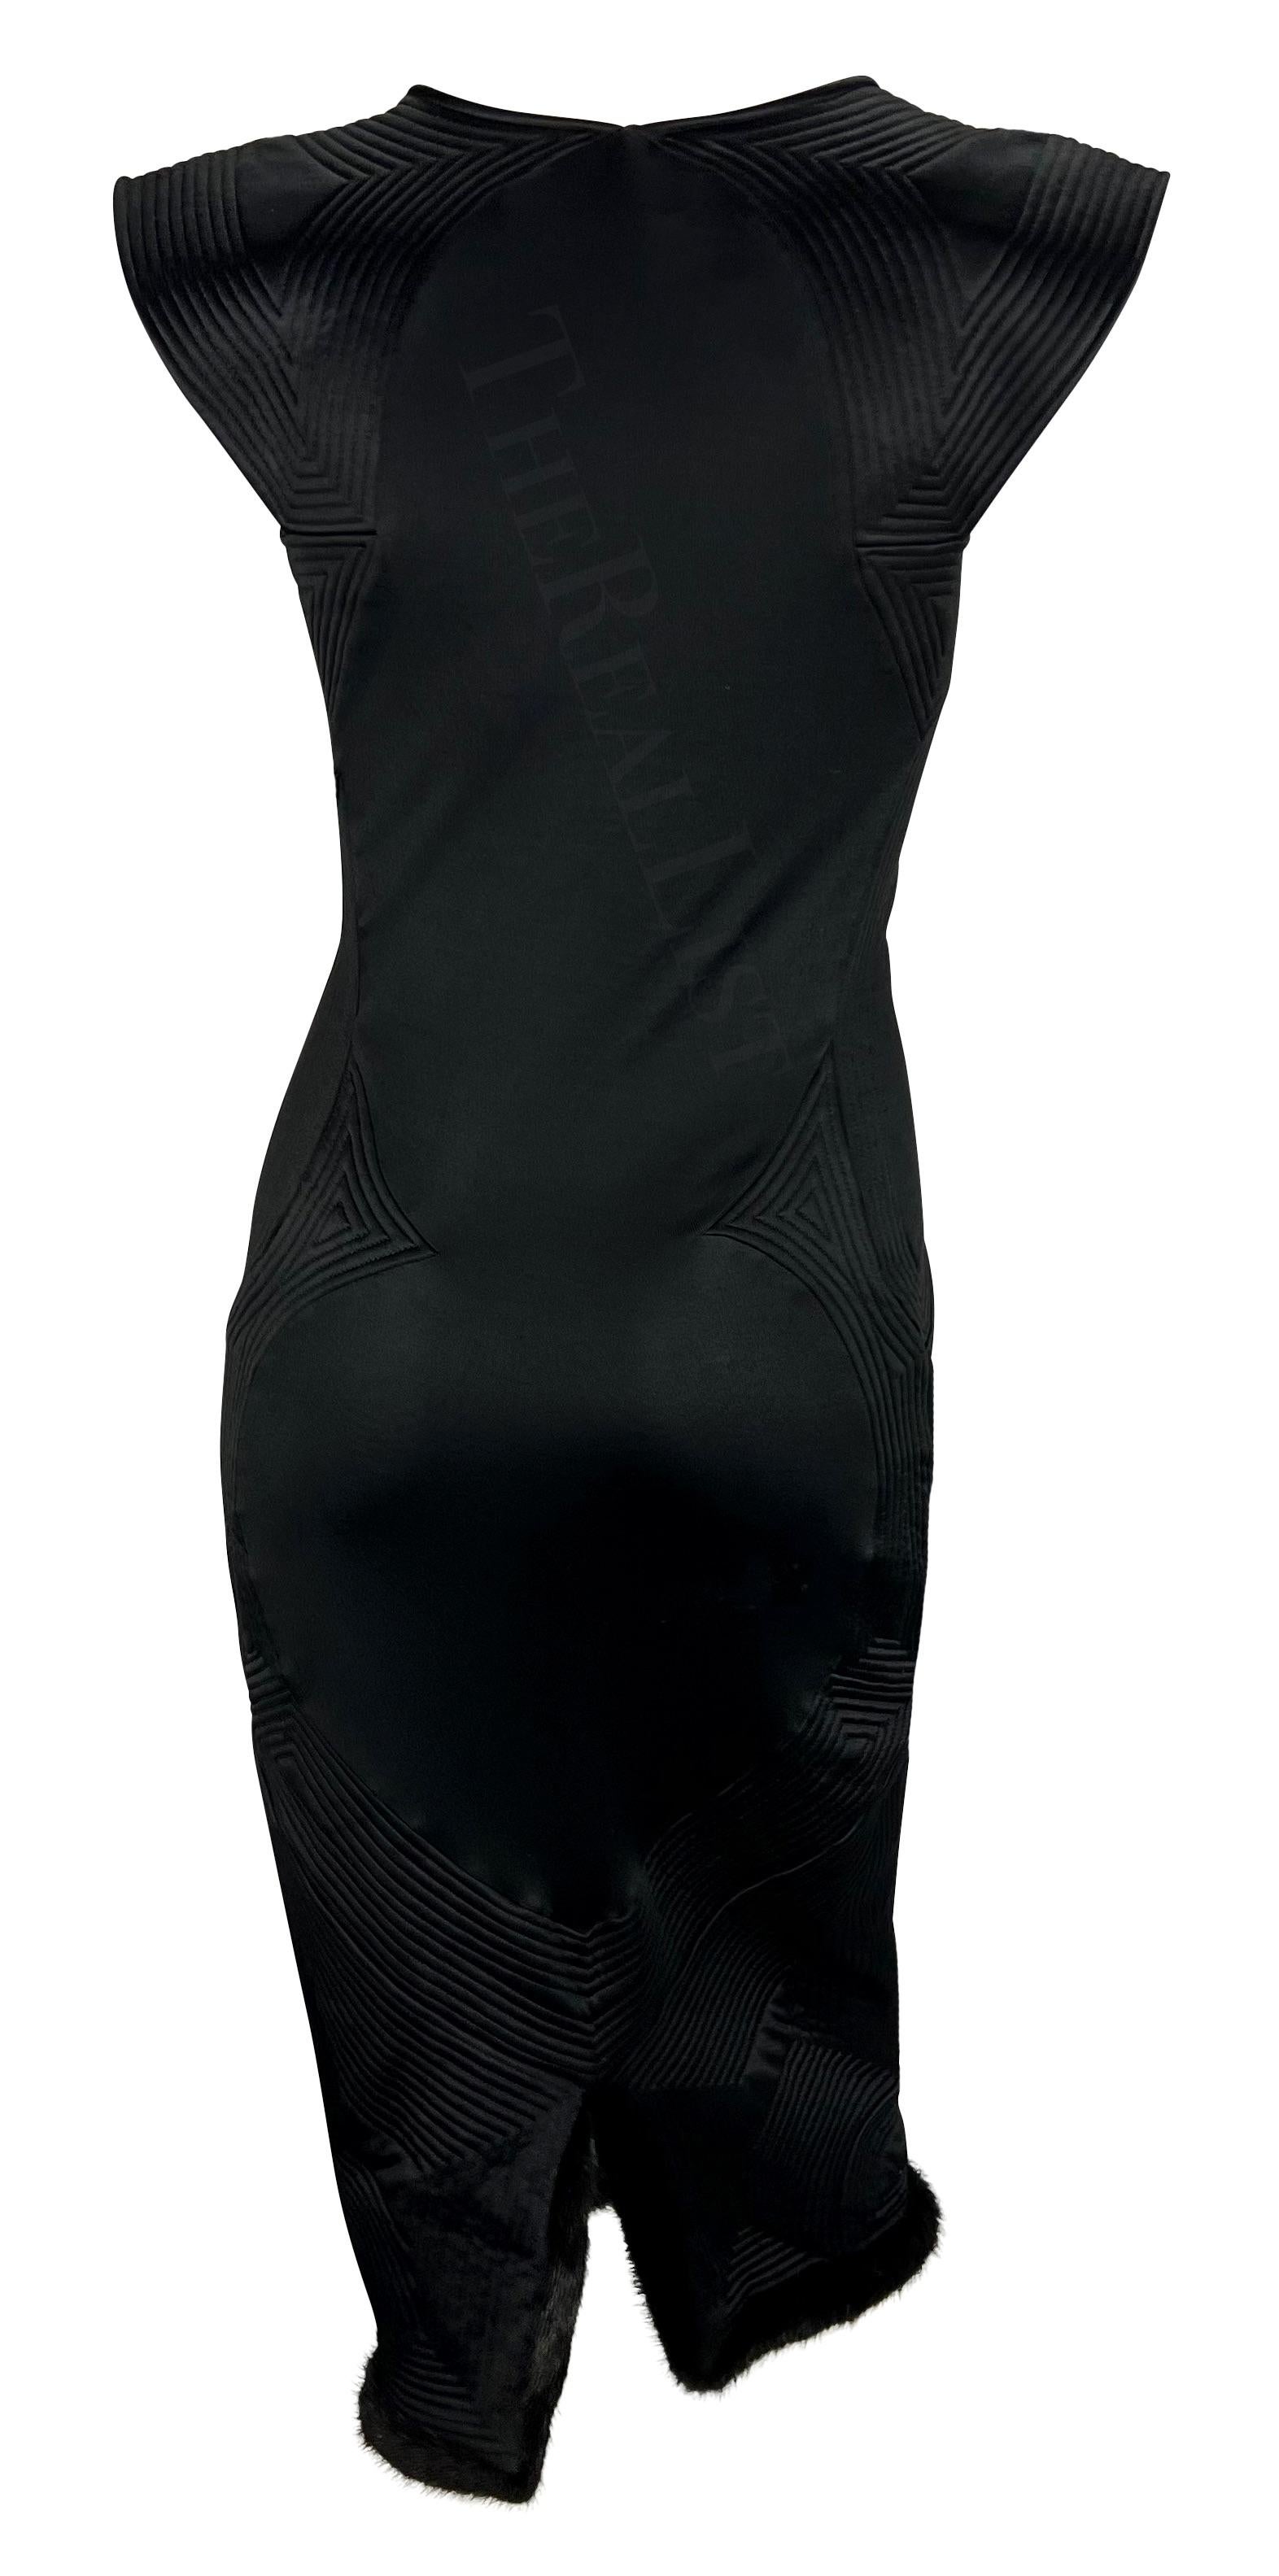 F/W 2004 Yves Saint Laurent by Tom Ford Black Mink Accented Midi Dress For Sale 3